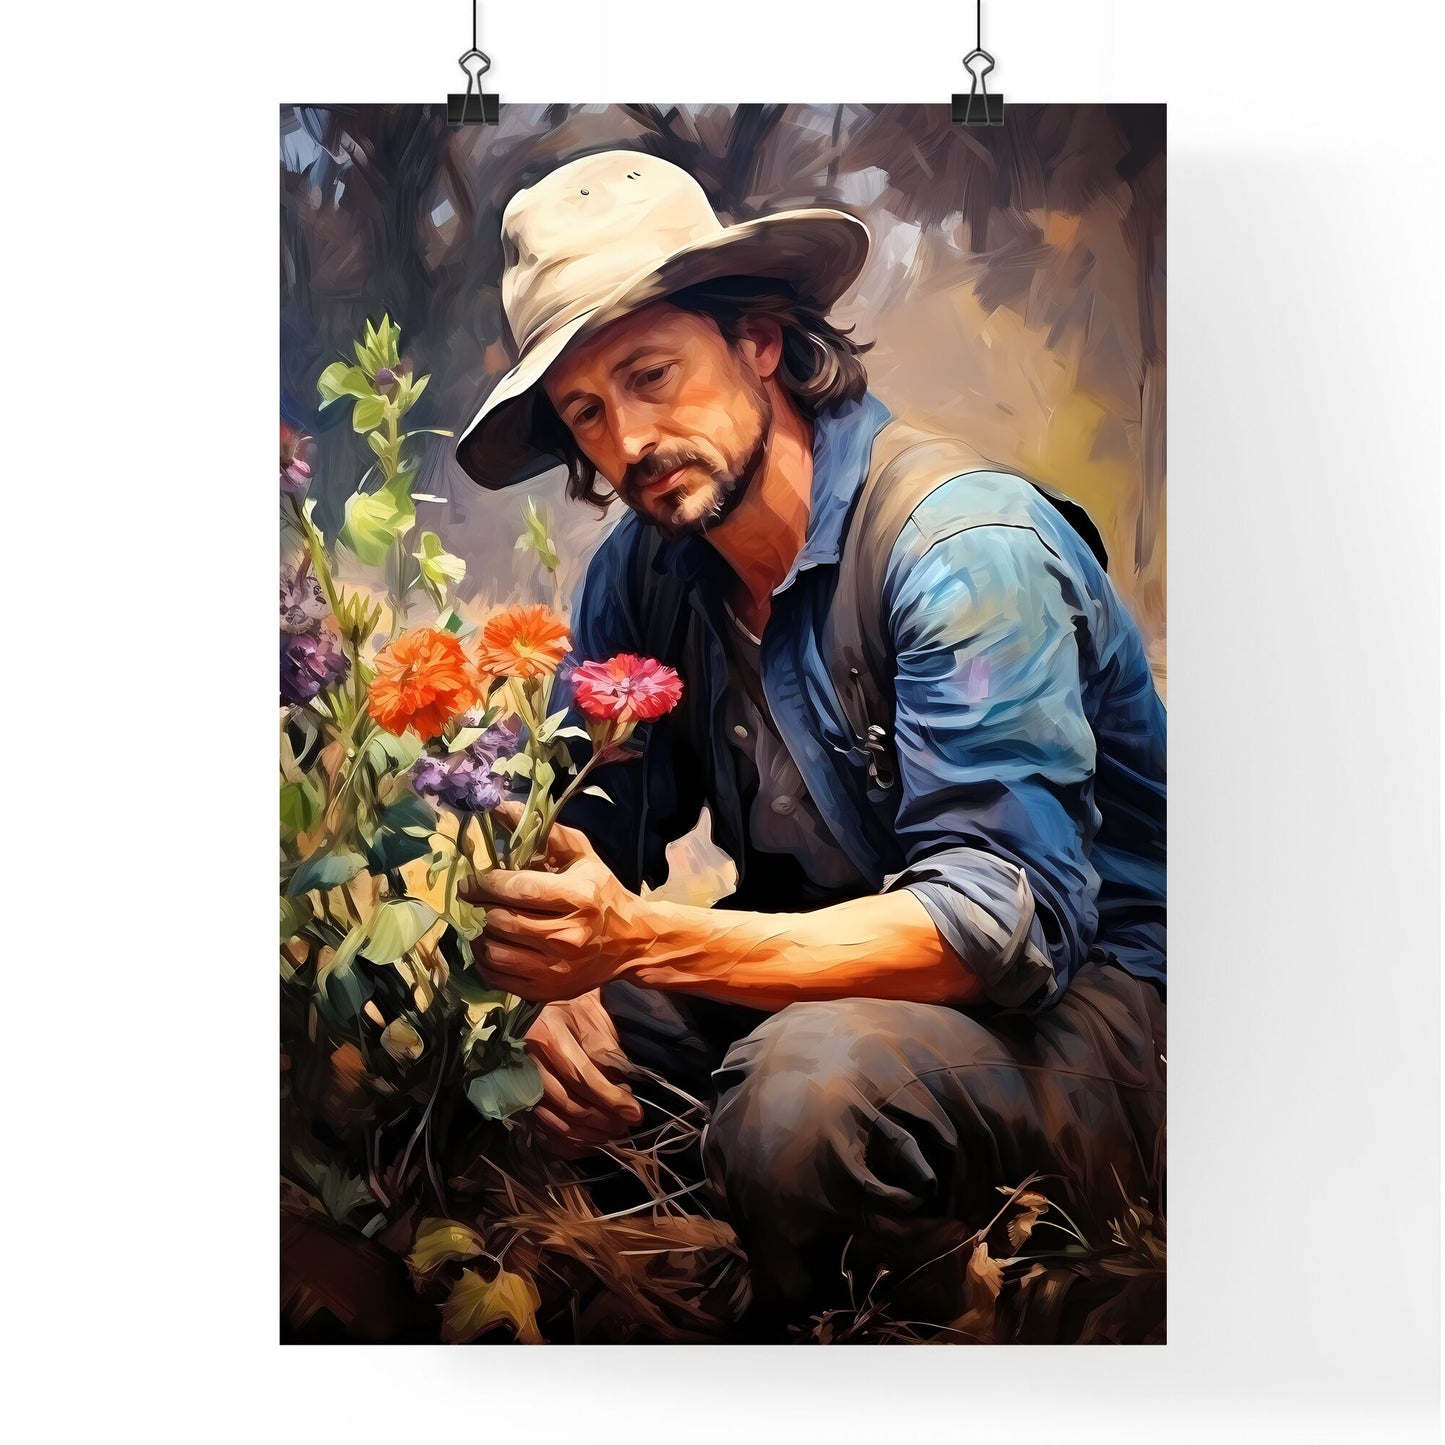 Planting Apple Tree In The Garden - A Man In A Hat Picking Flowers Default Title